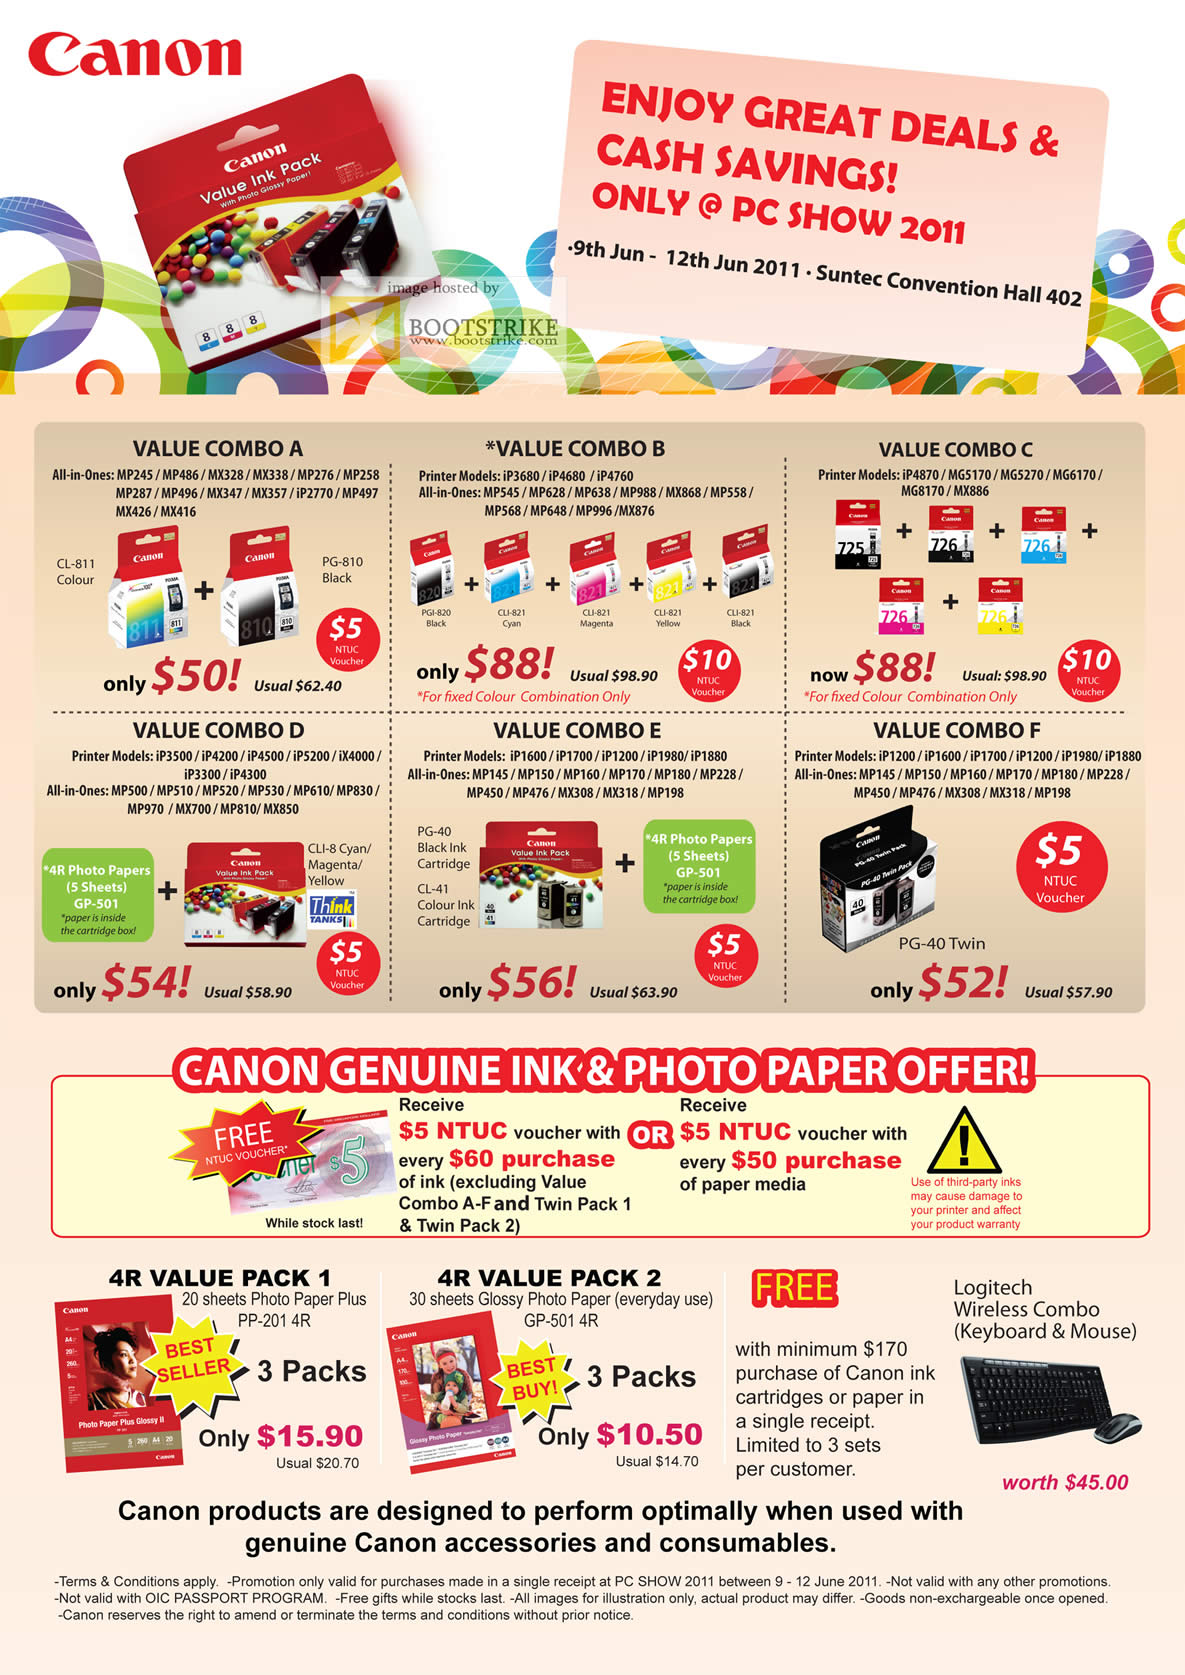 PC Show 2011 price list image brochure of Canon Printers Ink Cartridges Value Combos Photo Paper 4R